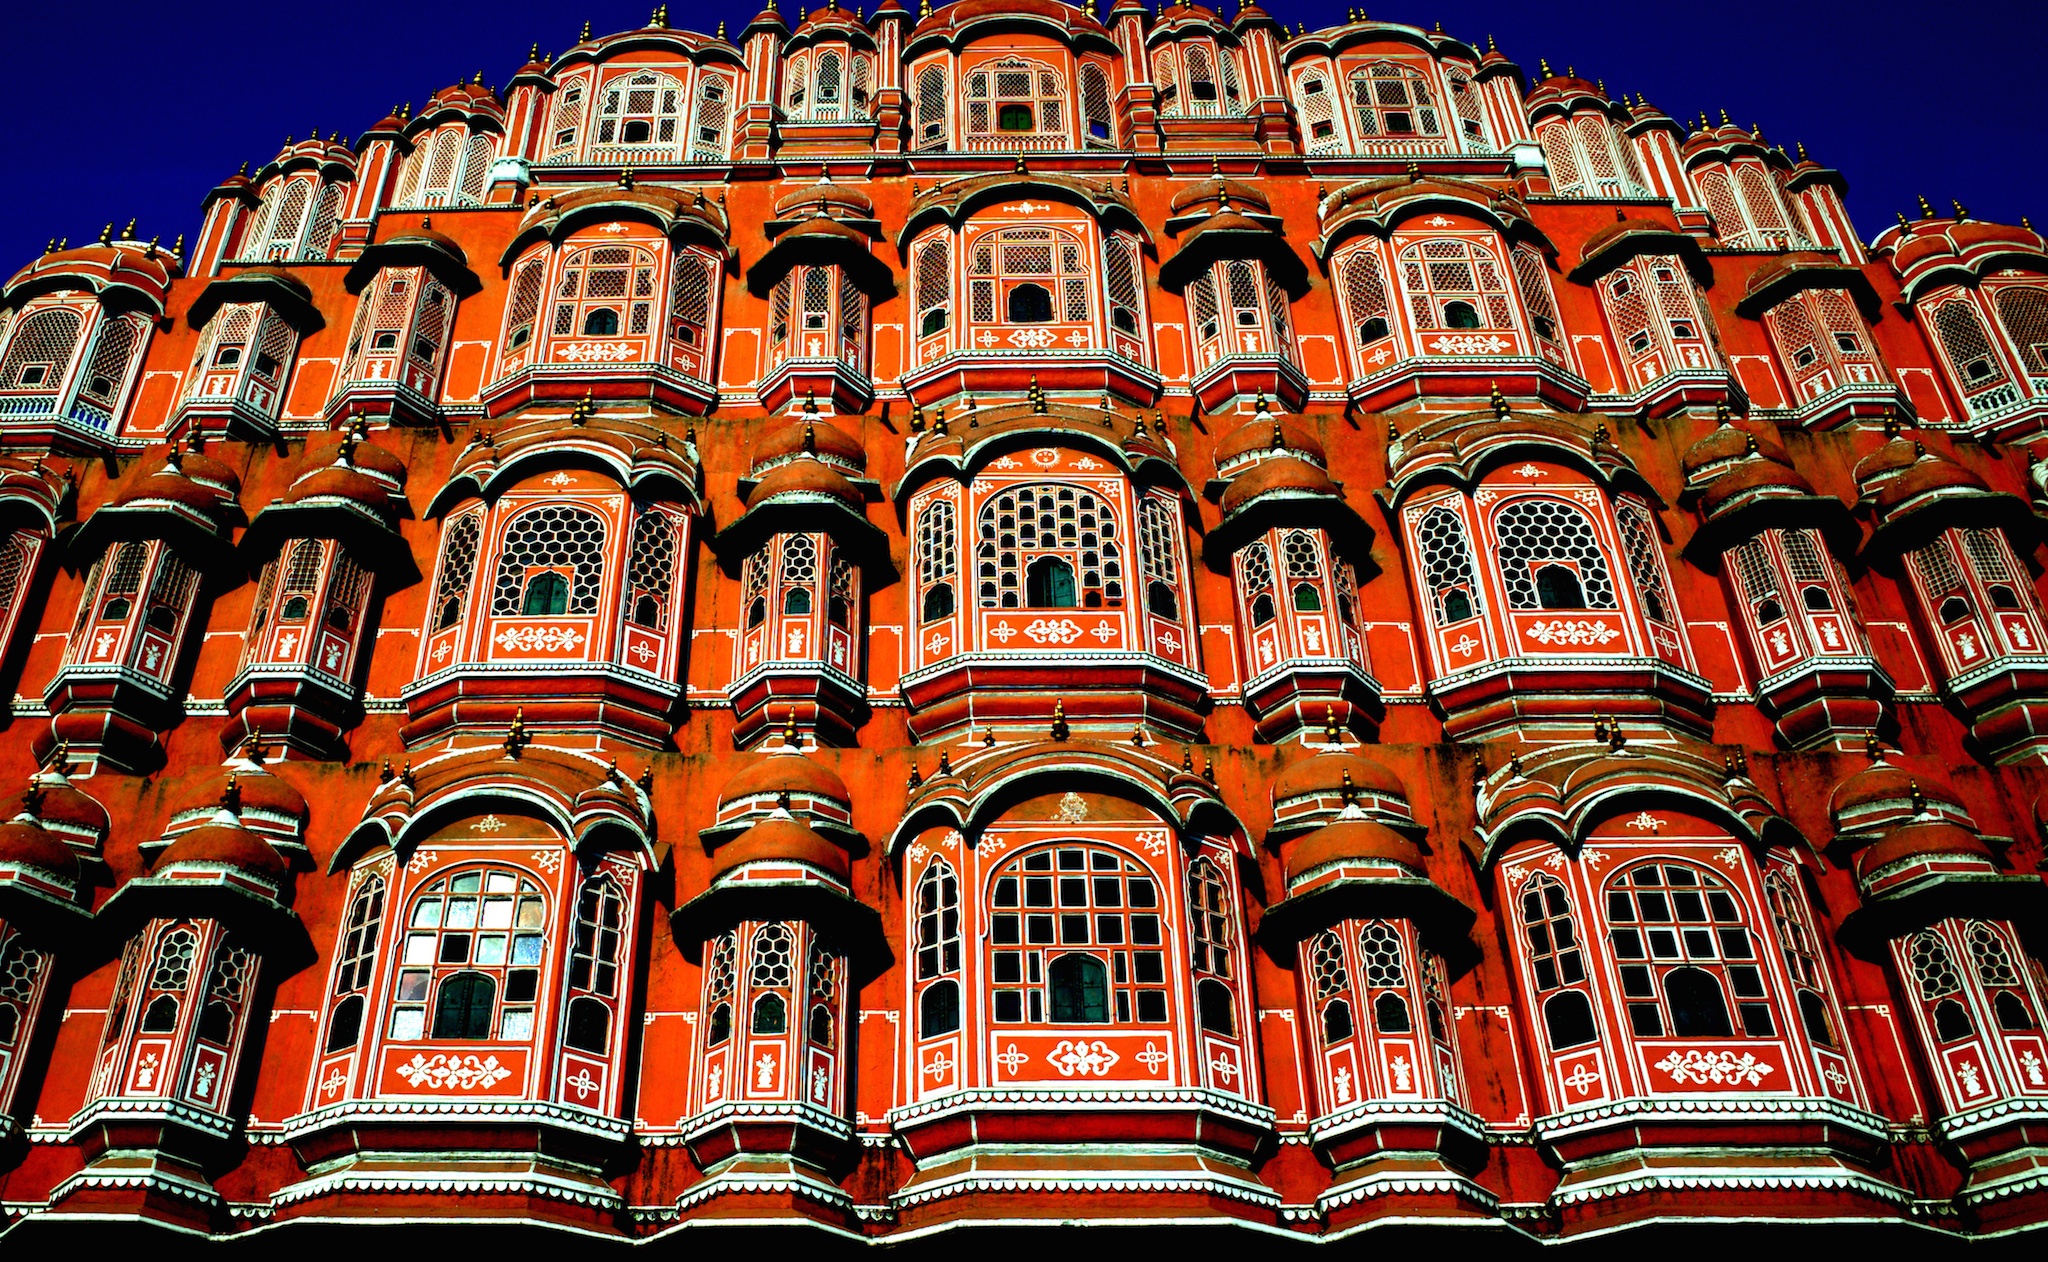 Palaces & Fortresses of Rajasthan - India | Tripsite